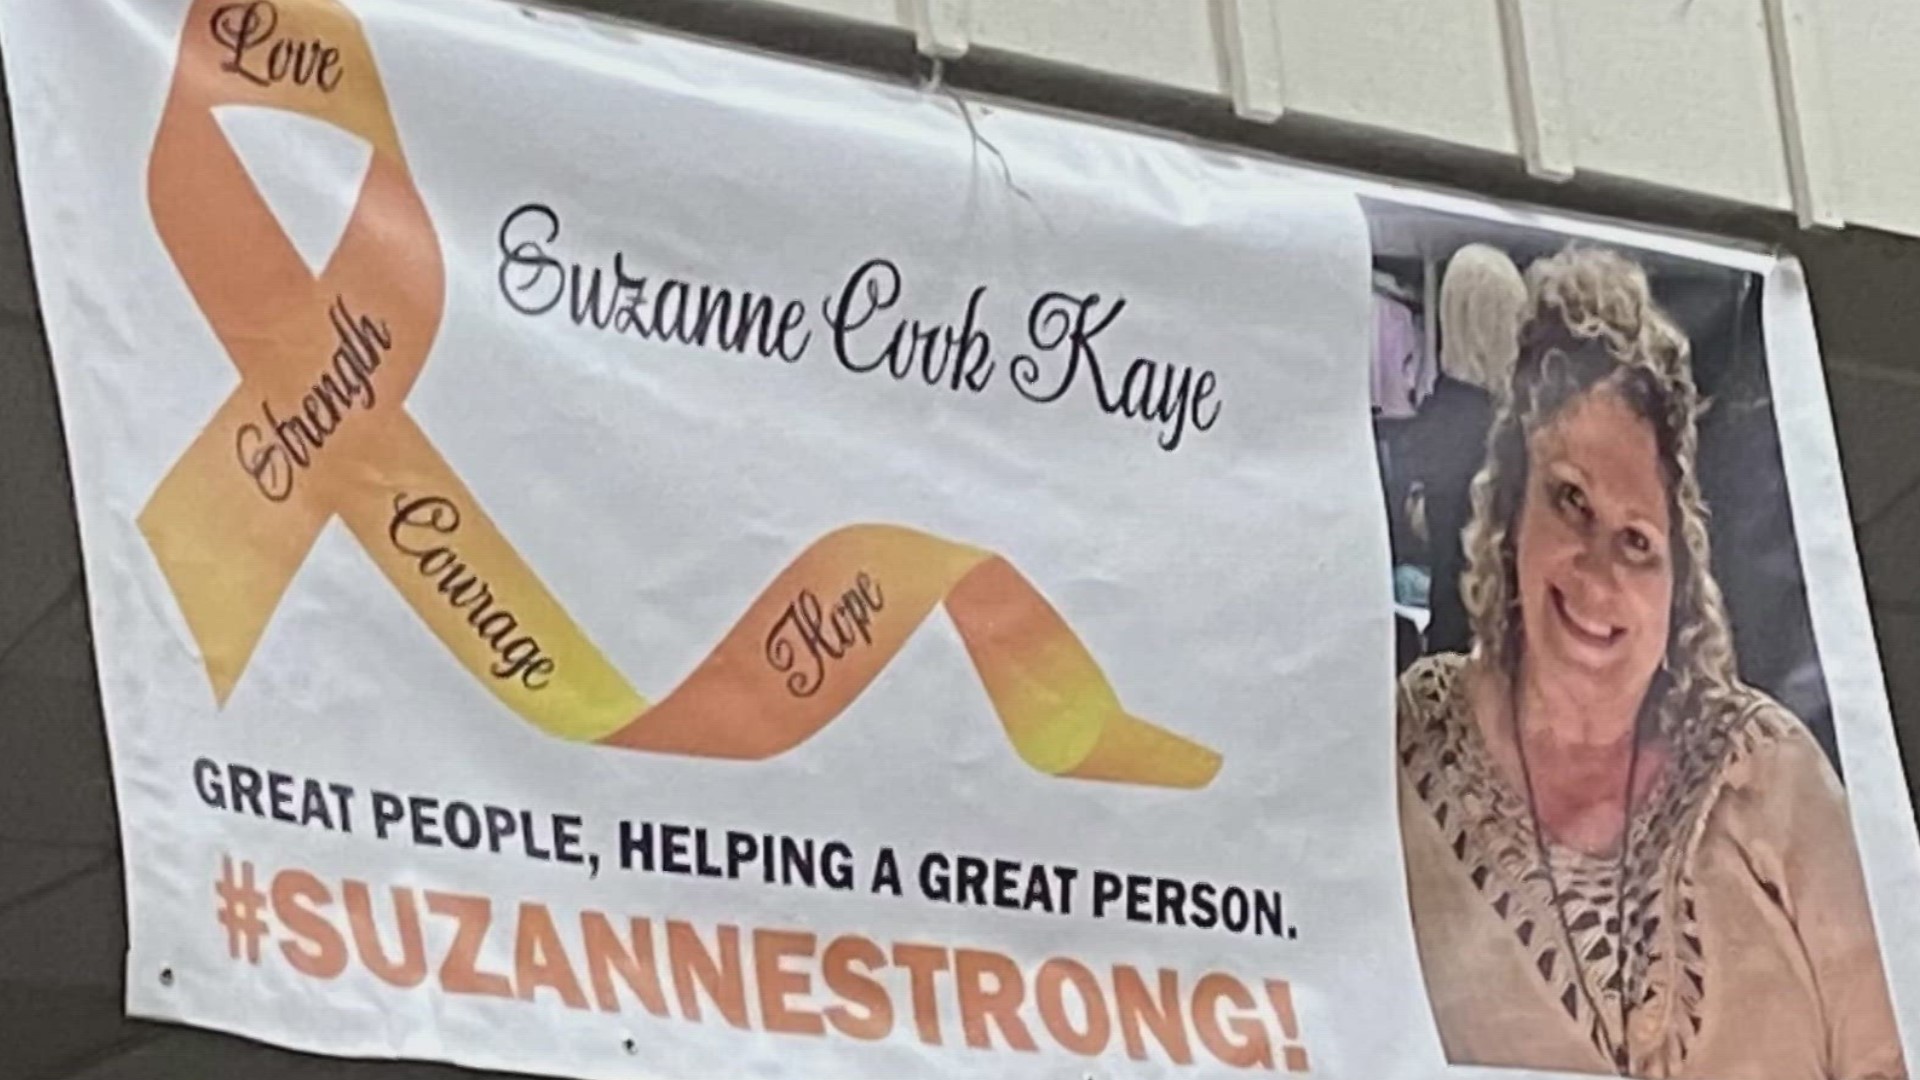 Money disappeared from a fundraiser for Susan Cook Kaye, who has a rare form of leukemia and needs a hip replacement. An organizer believes much more was stolen.